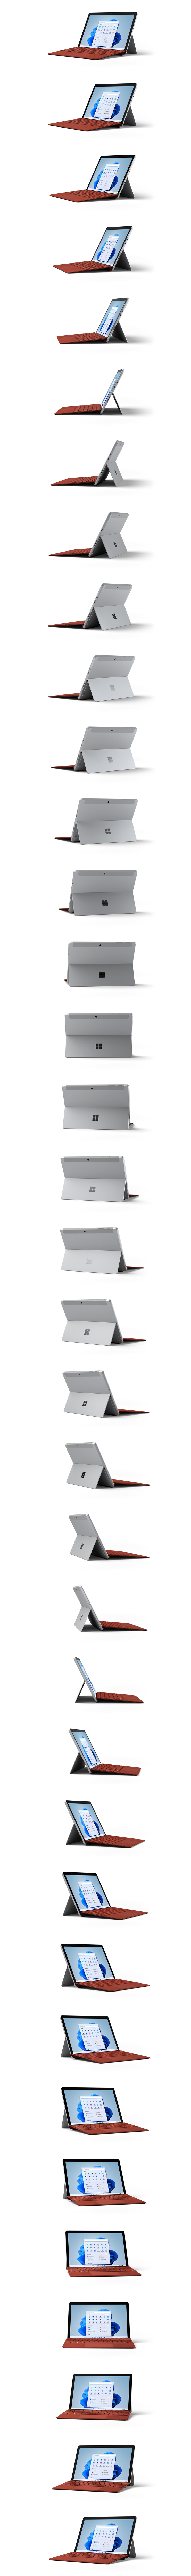 Surface Go 3 rotating 360 degrees.